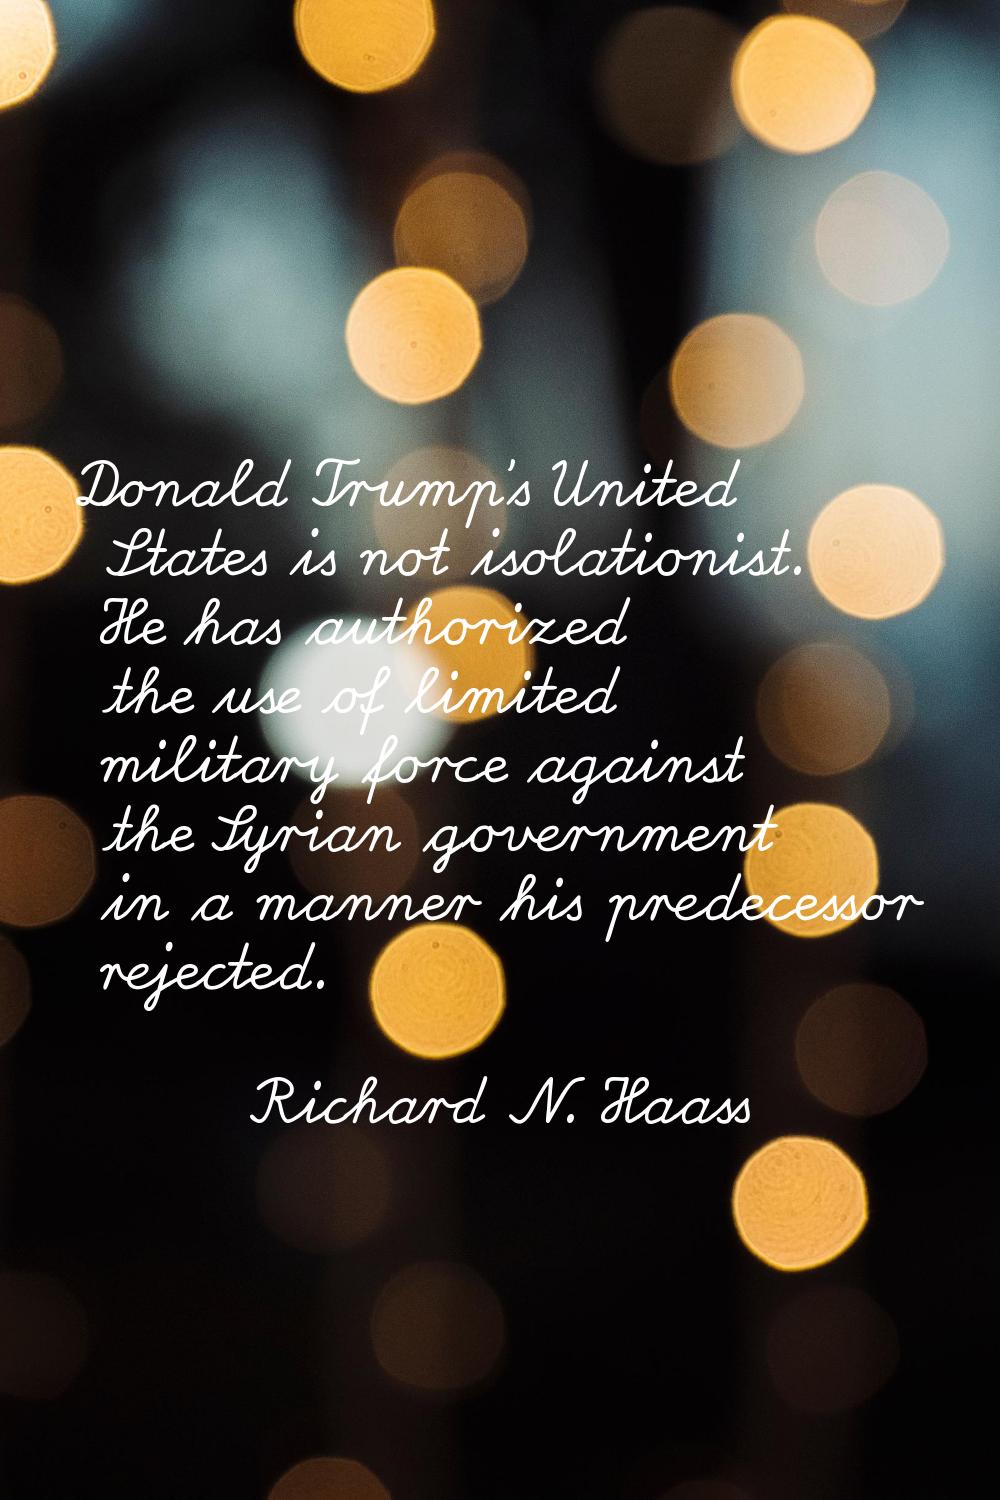 Donald Trump's United States is not isolationist. He has authorized the use of limited military for